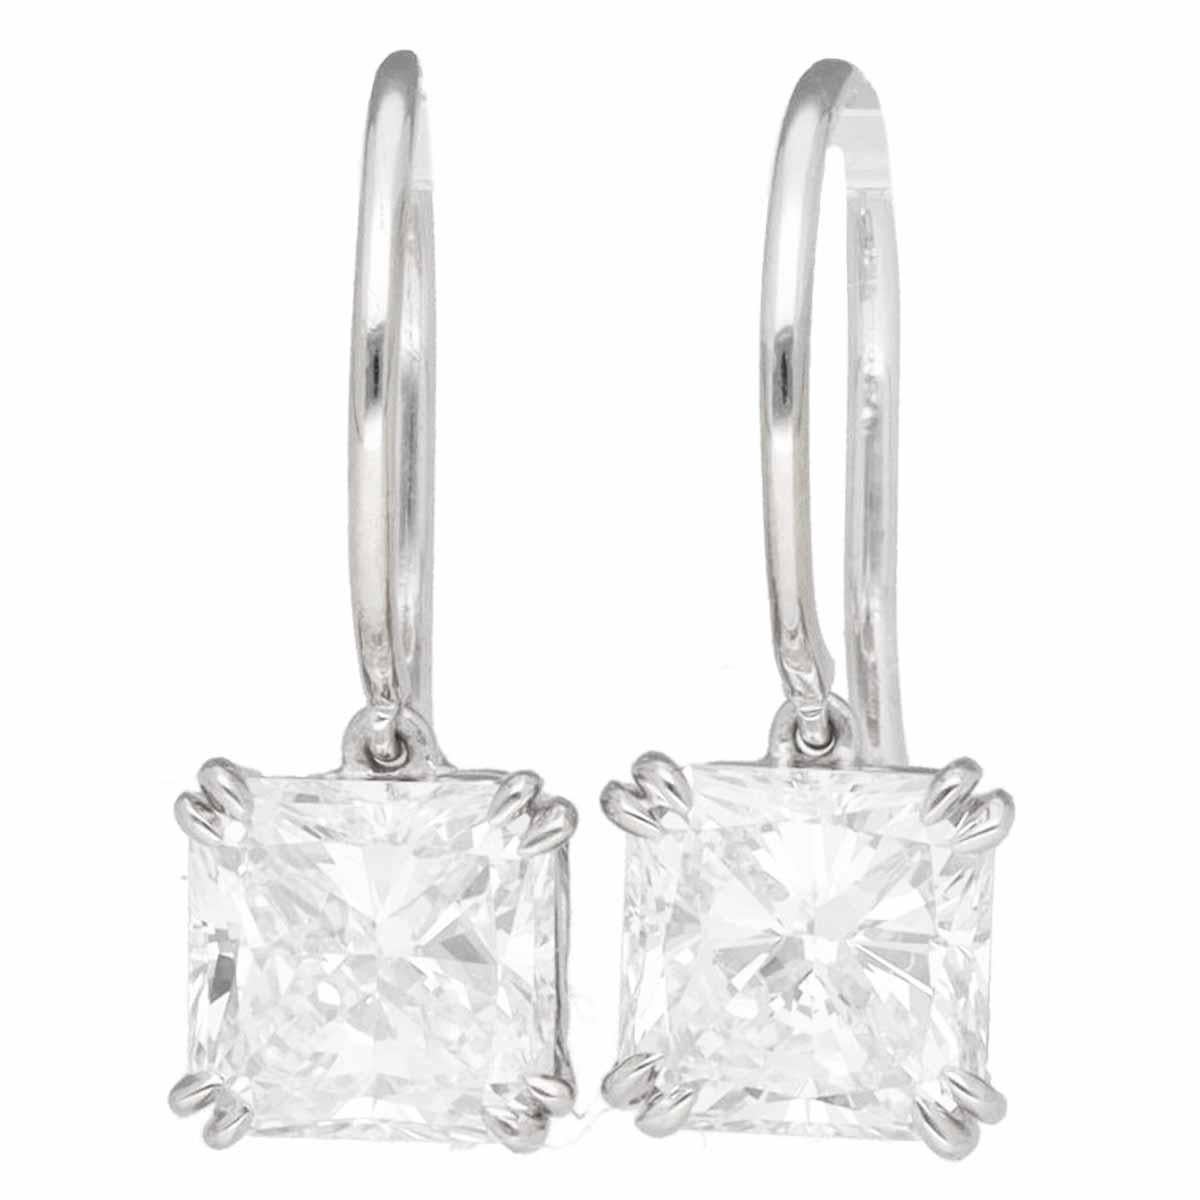 Brand:HARRY WINSTON
Name:Solitaire Square Cut studs Earring
Material:2P Diamond (1.01ct F-VS1 / 1.03ct F-VS1), Pt950 Platinum
Weight:2.1g（Approx)
Size:1.01ct 5.65-5.57×3.79mm、
        1.03ct 5.65×5.61×3.90mm
Comes with:Harry Winston Box, Case,
     